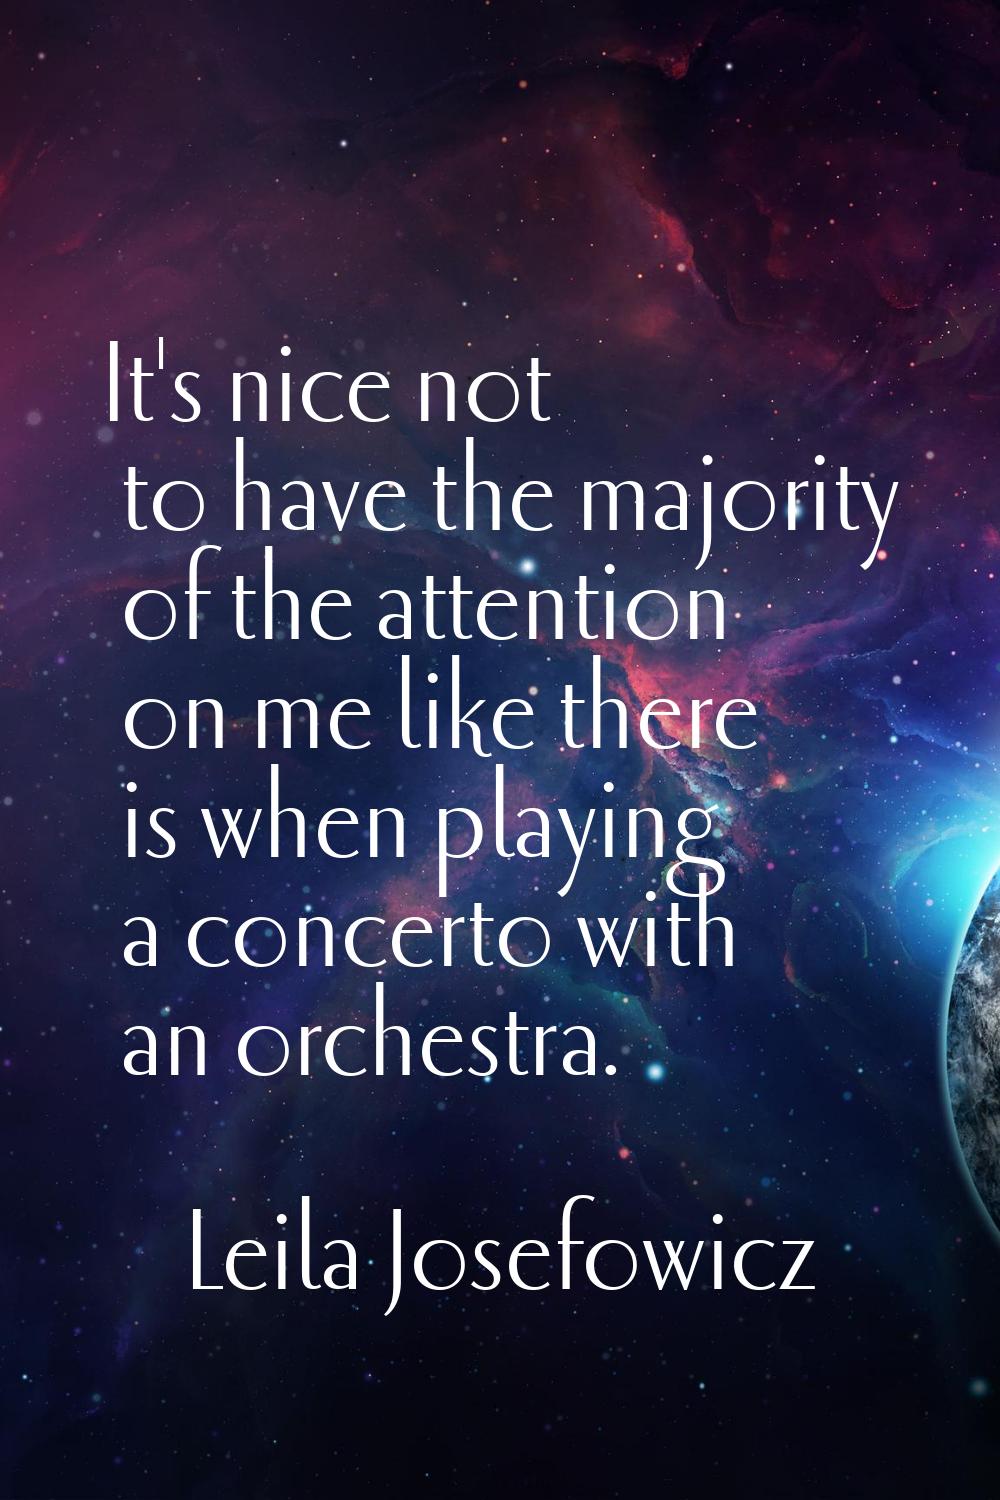 It's nice not to have the majority of the attention on me like there is when playing a concerto wit